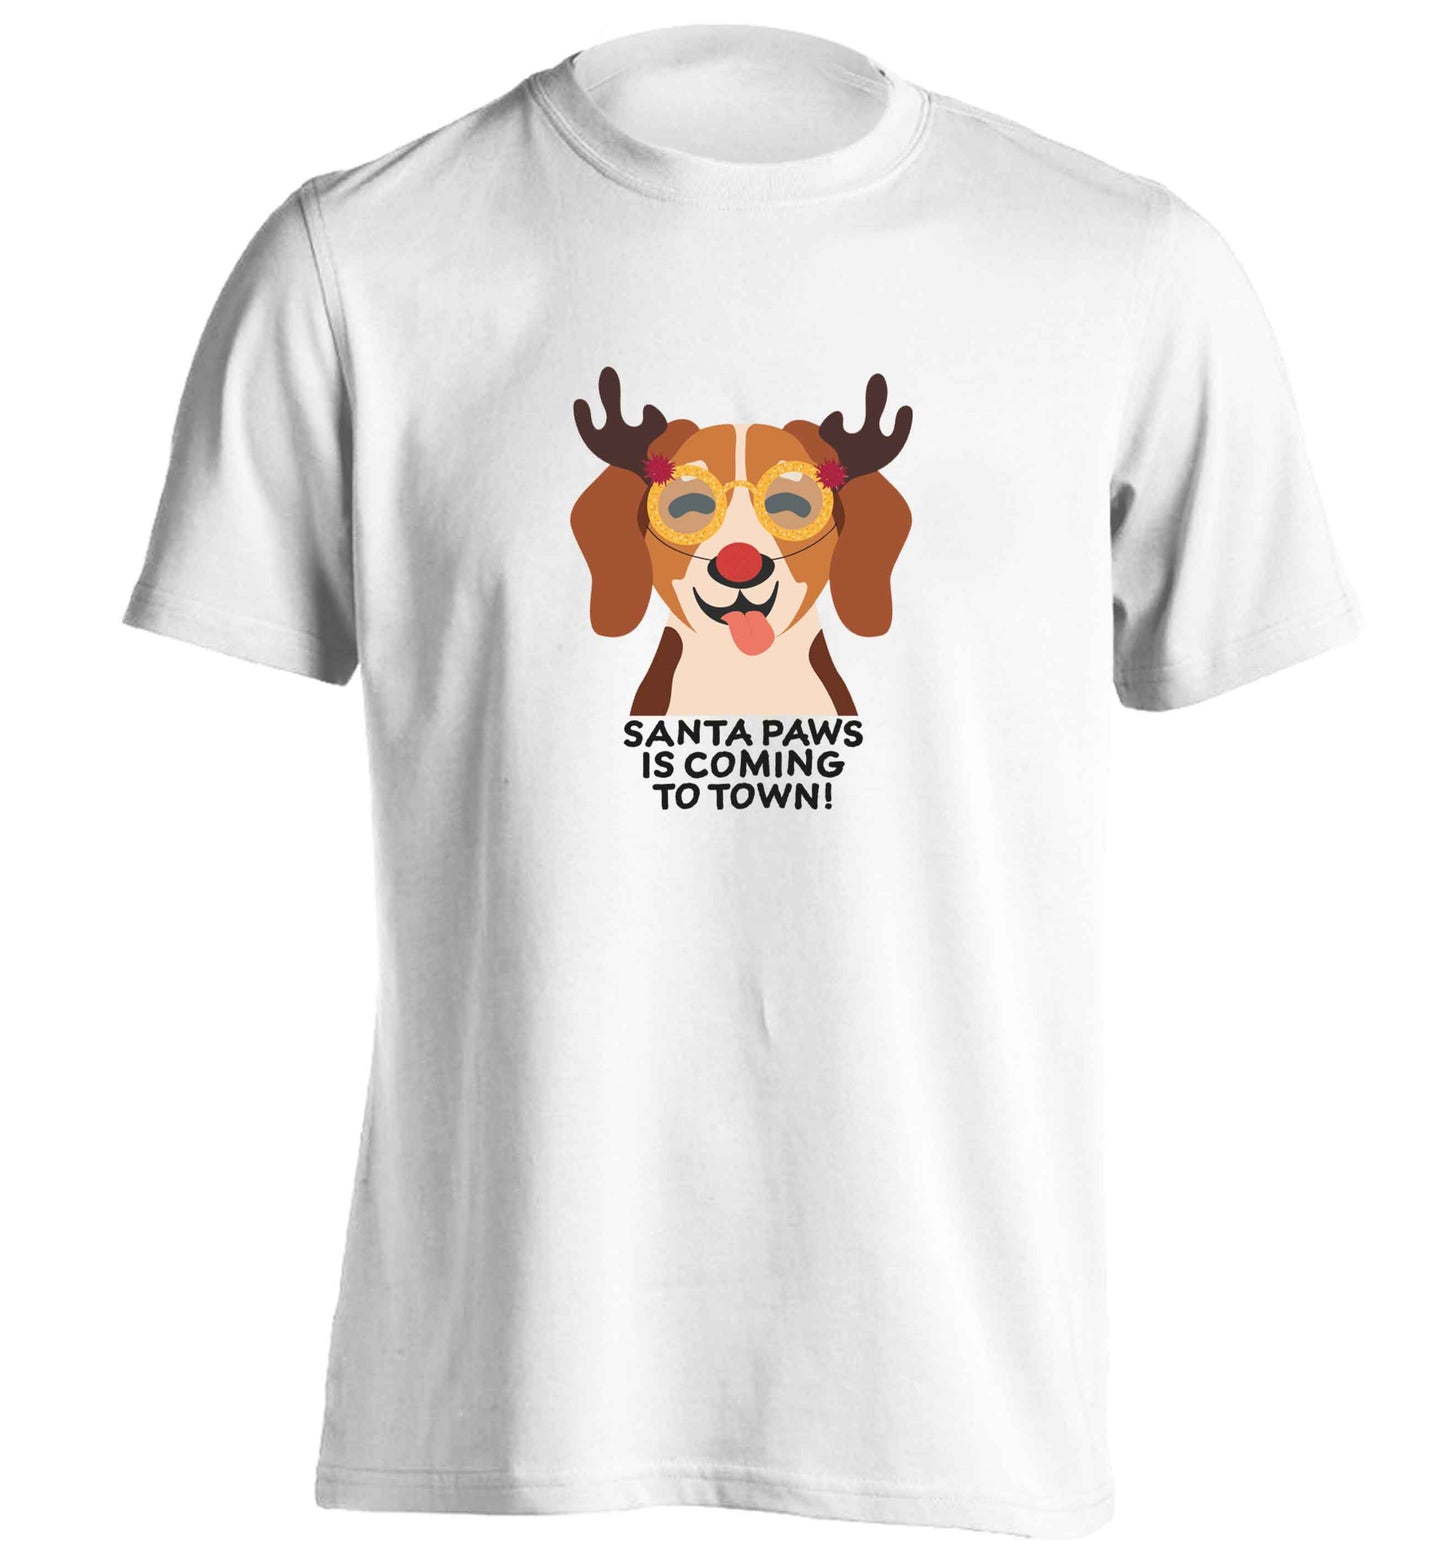 Santa paws is coming to town adults unisex white Tshirt 2XL